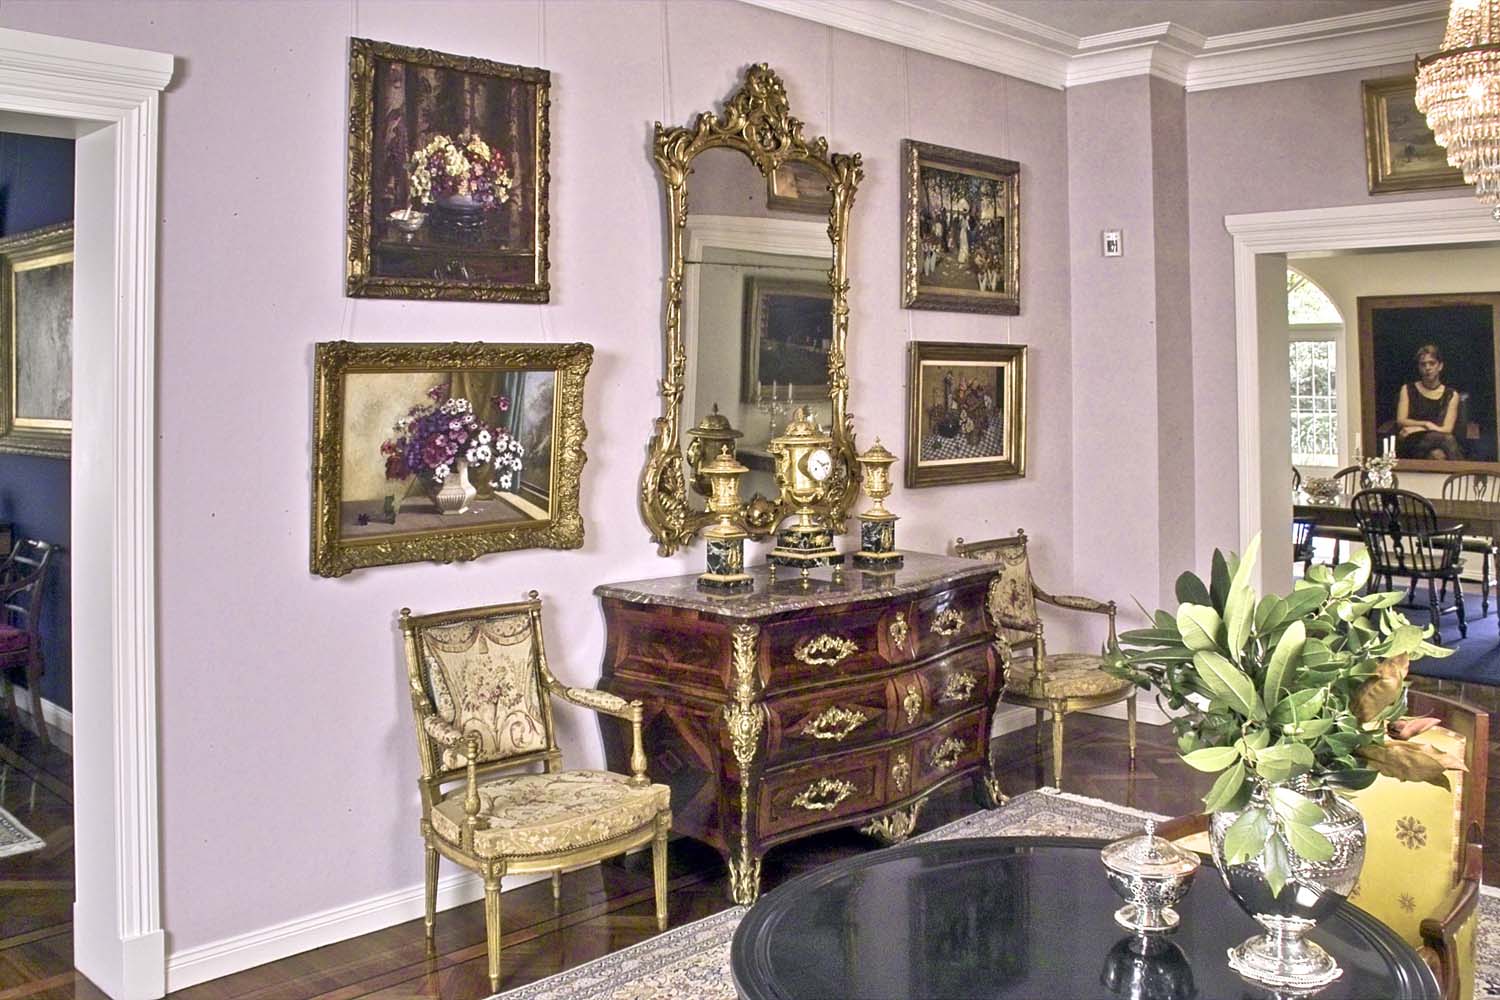 4 Classic fromal French mansion interior design